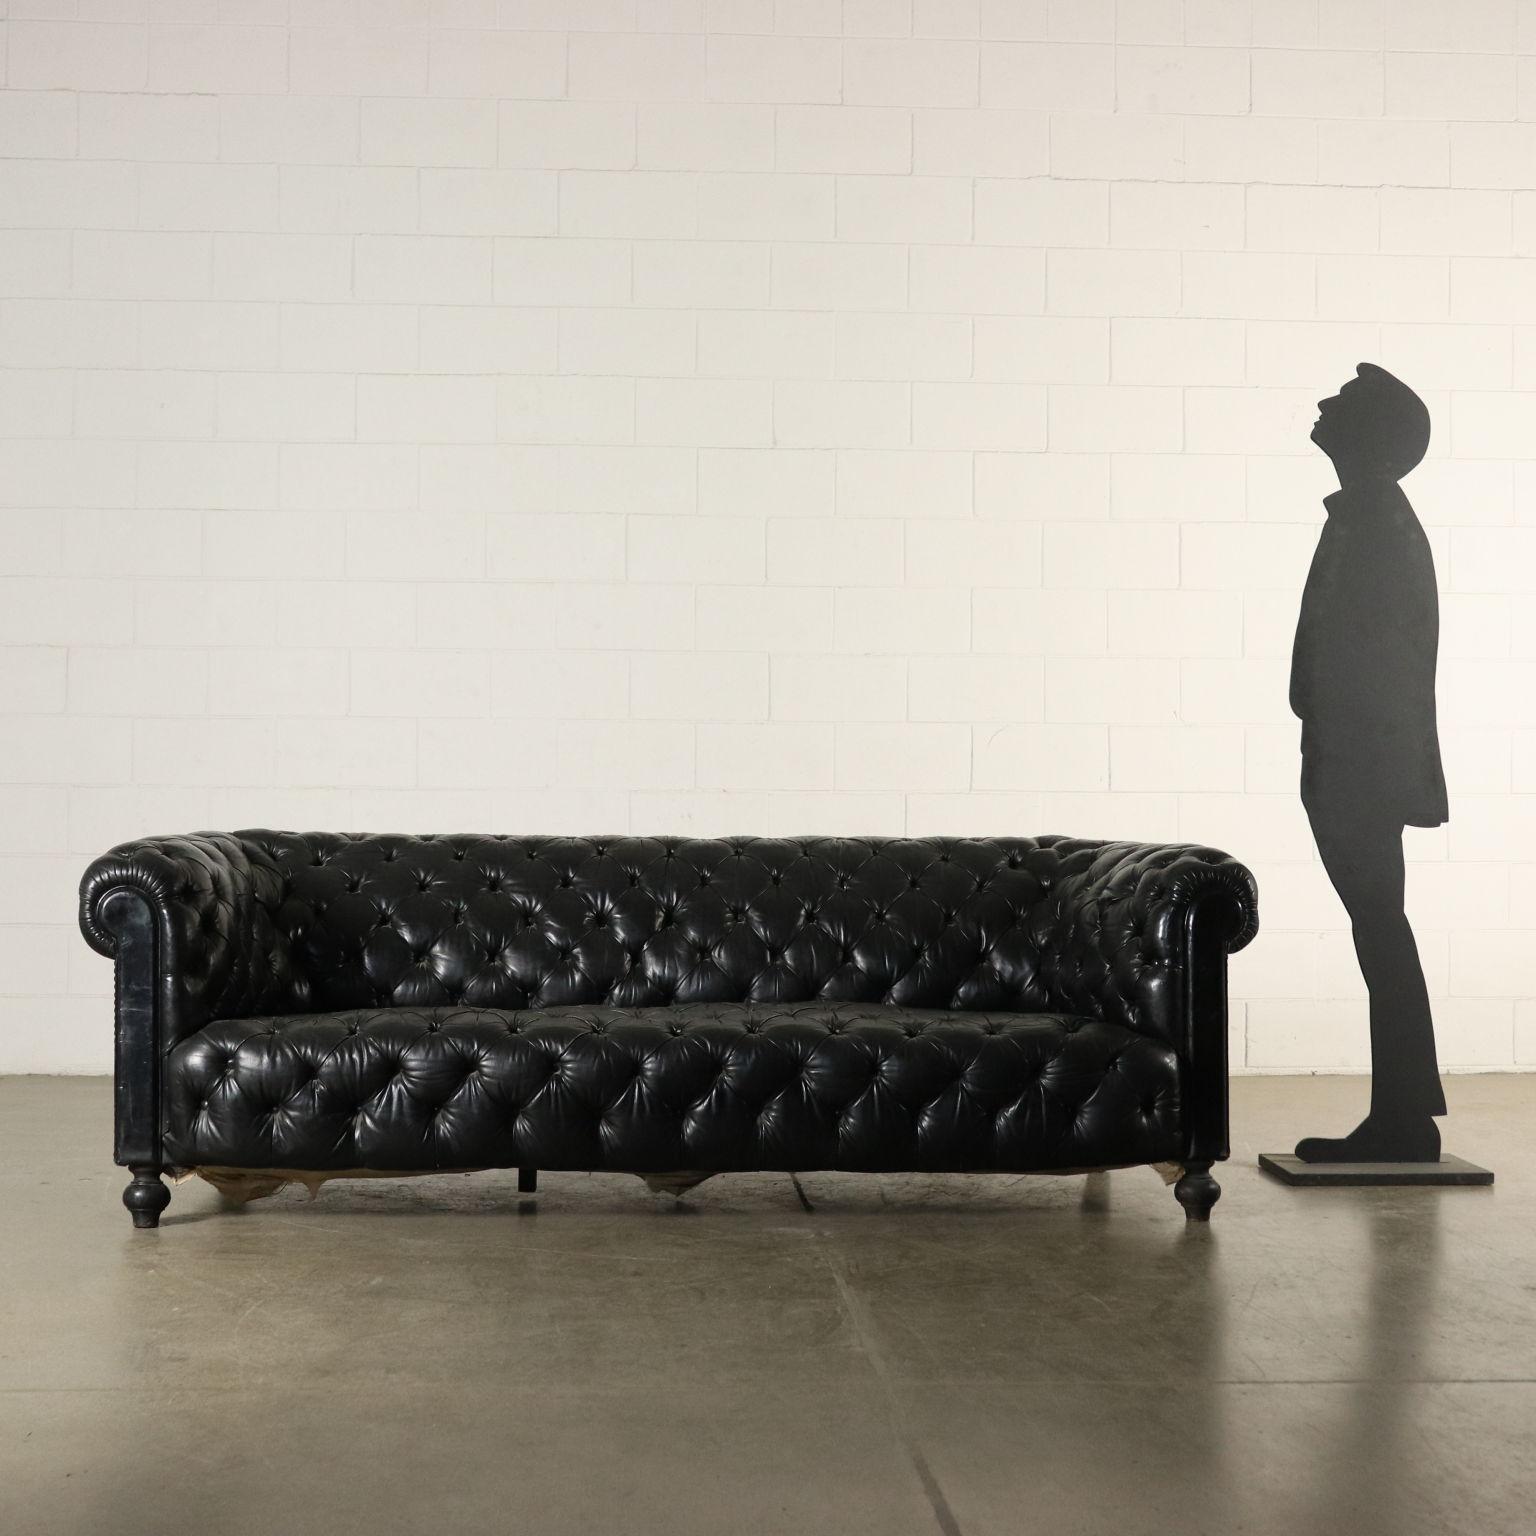 Chesterfield sofa, black leather. Turned carved and ebonized feet. Manufactured in Italy, first half of the 20th century.